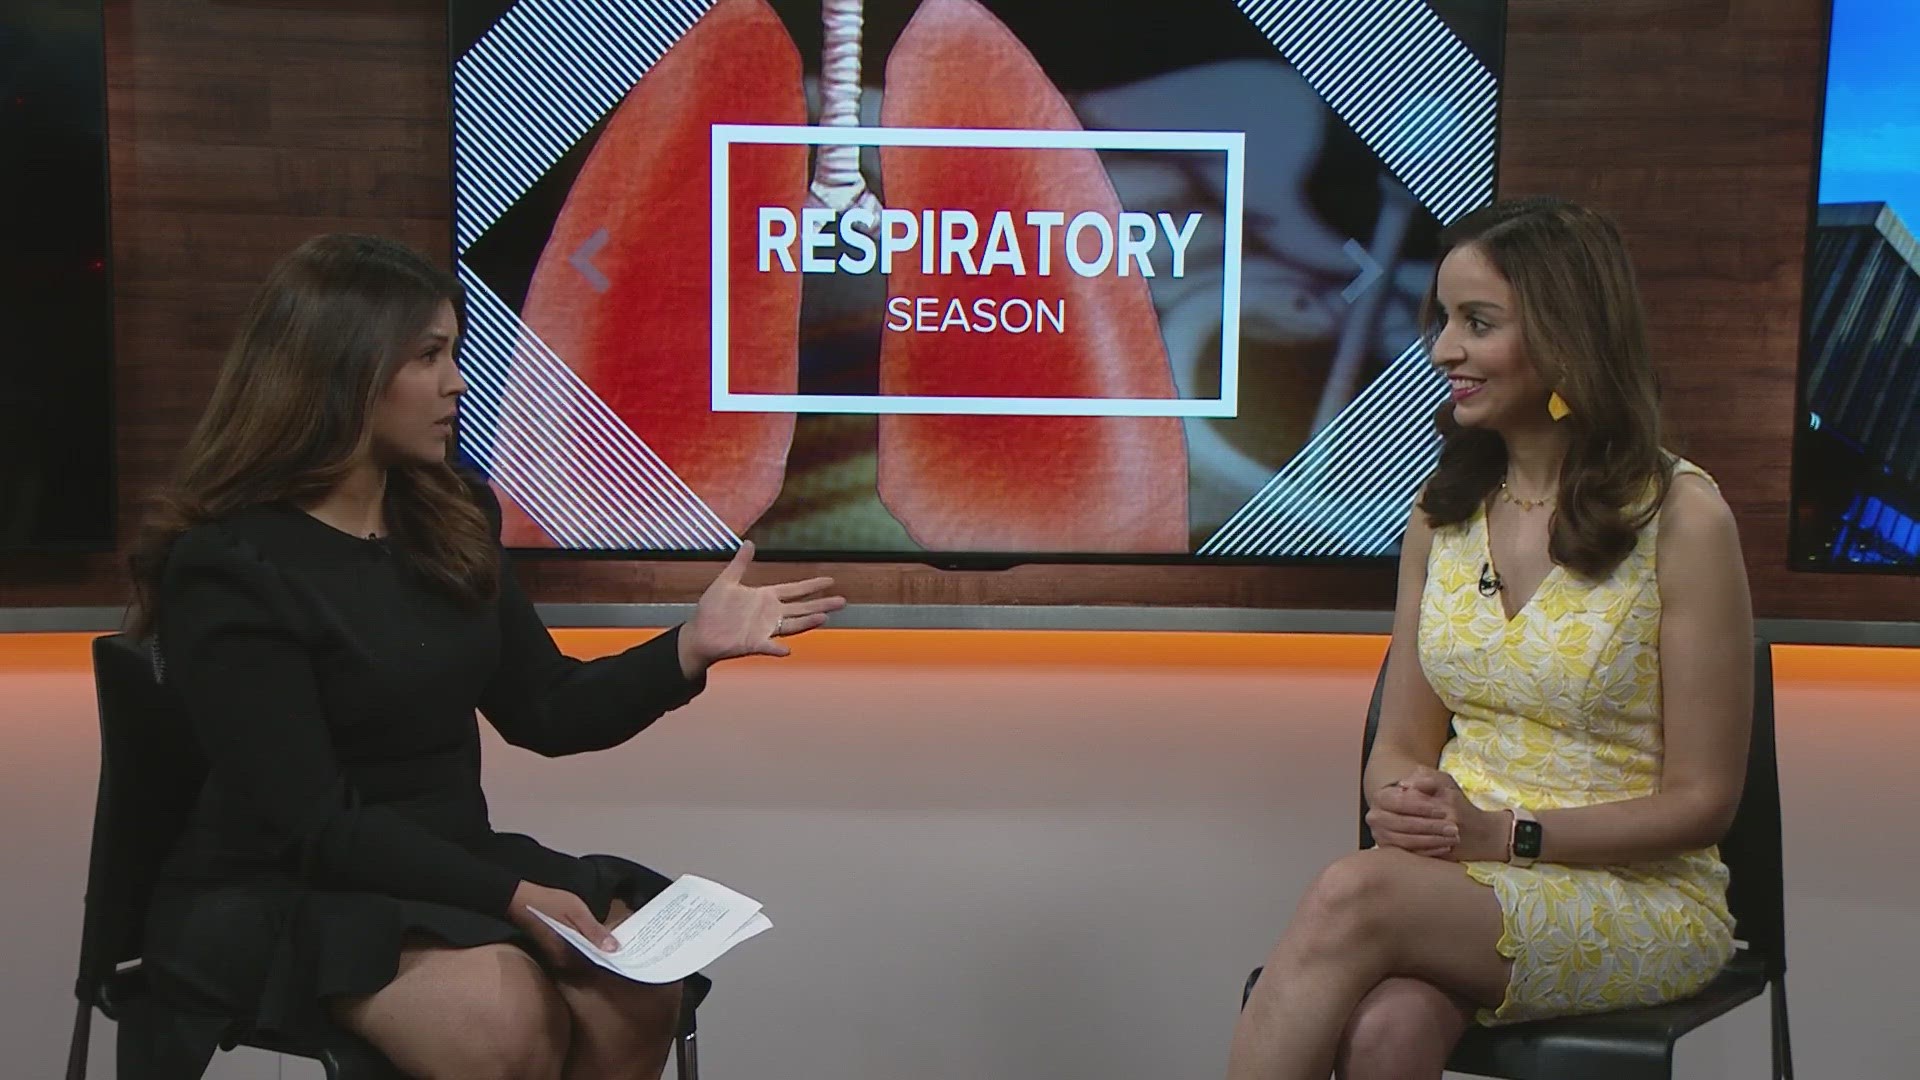 9Health expert Dr. Payal Kohli talks more about why this year's respiratory season was different.